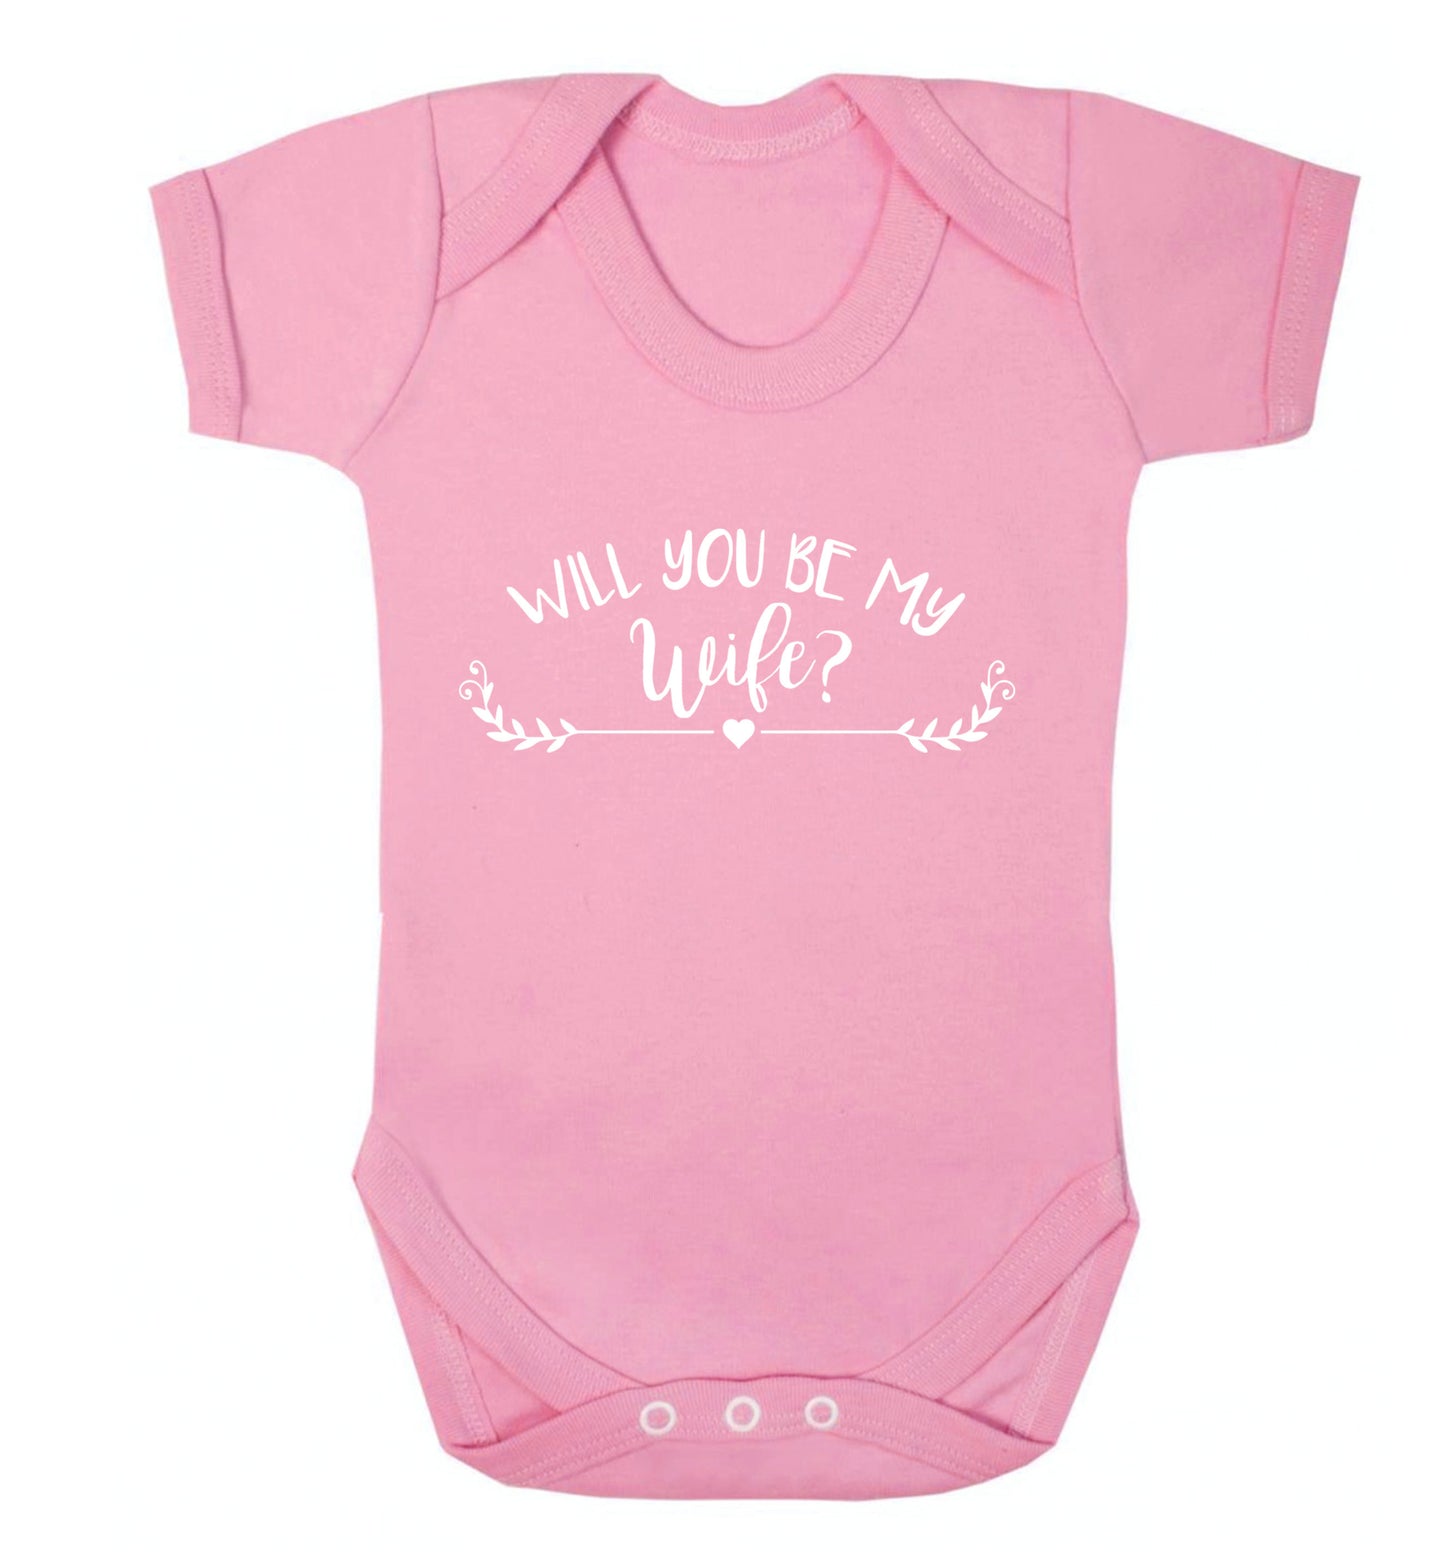 Will you be my wife? Baby Vest pale pink 18-24 months